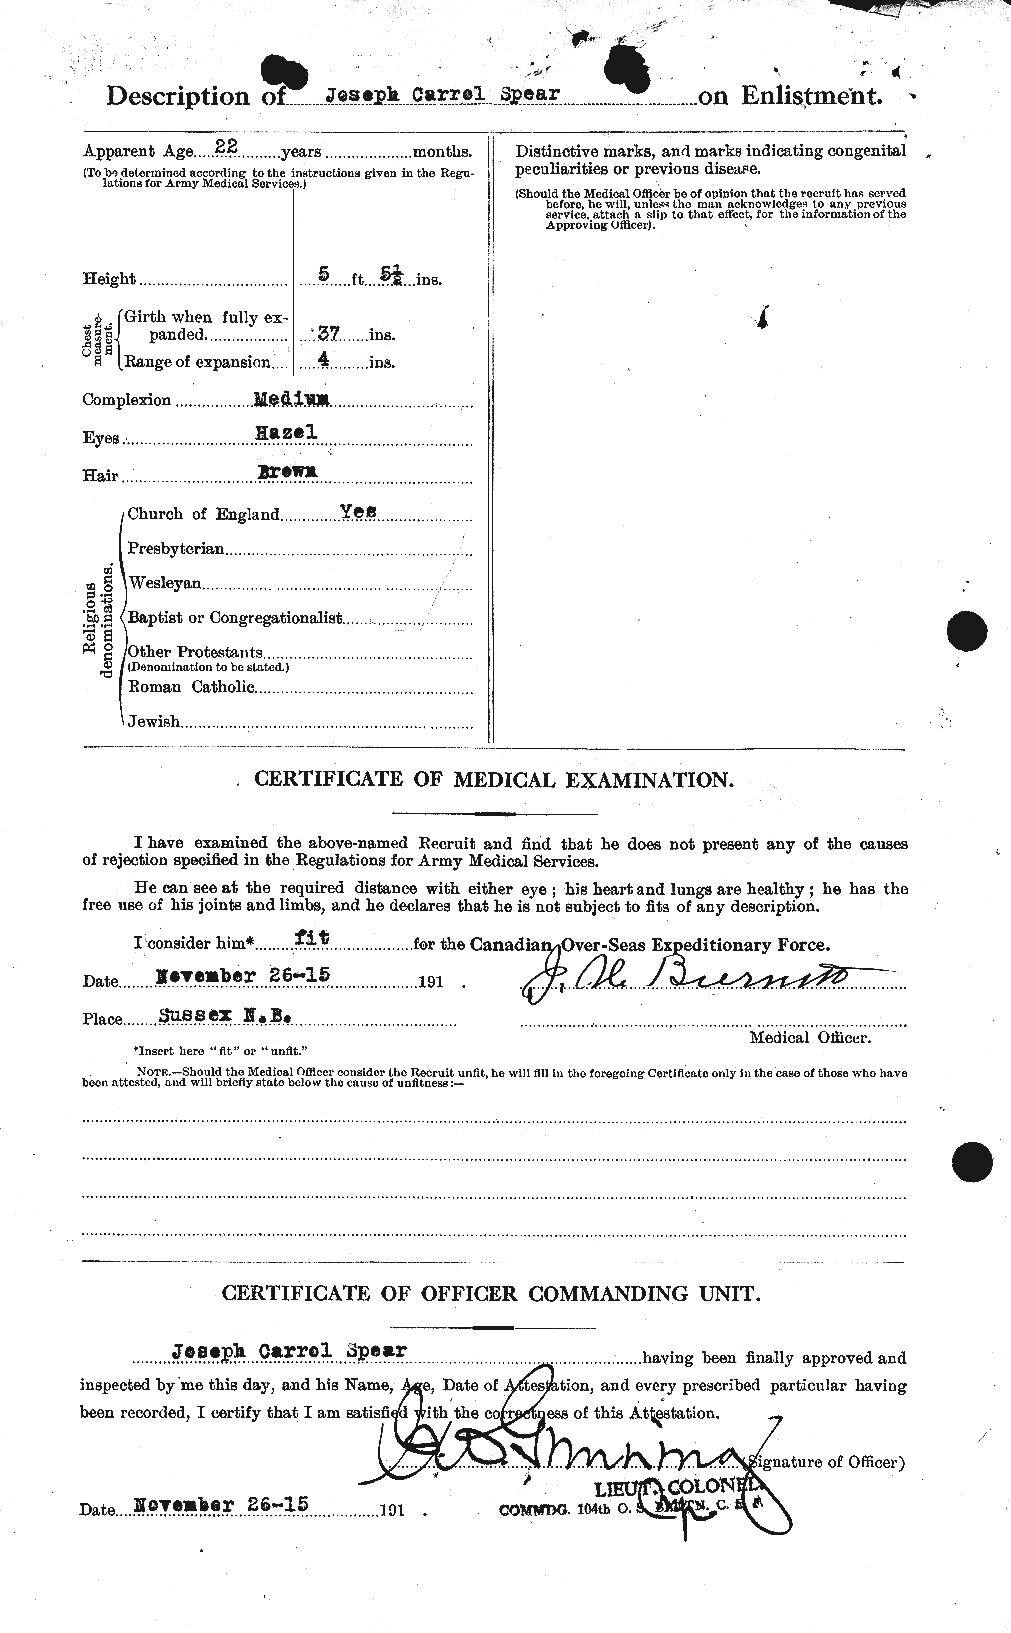 Personnel Records of the First World War - CEF 110833b